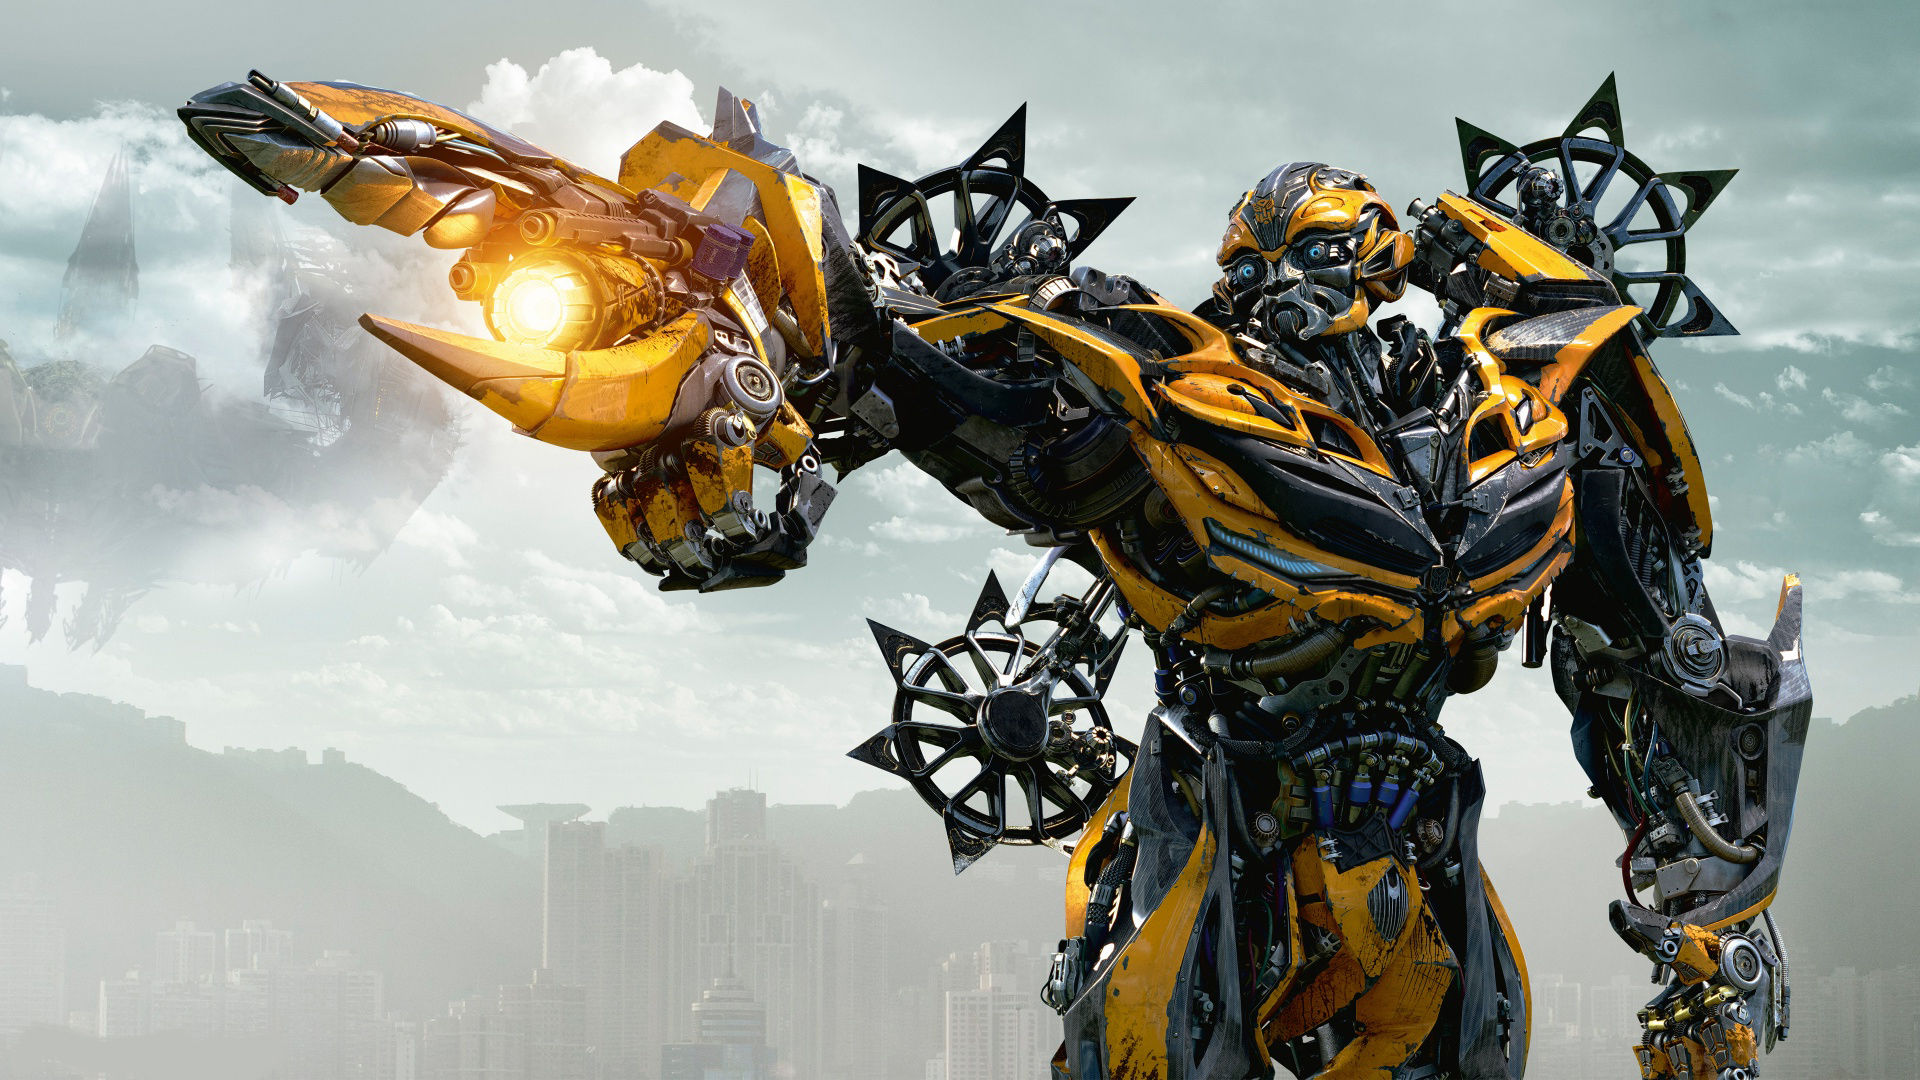 Transformers 4 Wallpapers for PC 9855 - HD Wallpaper Site